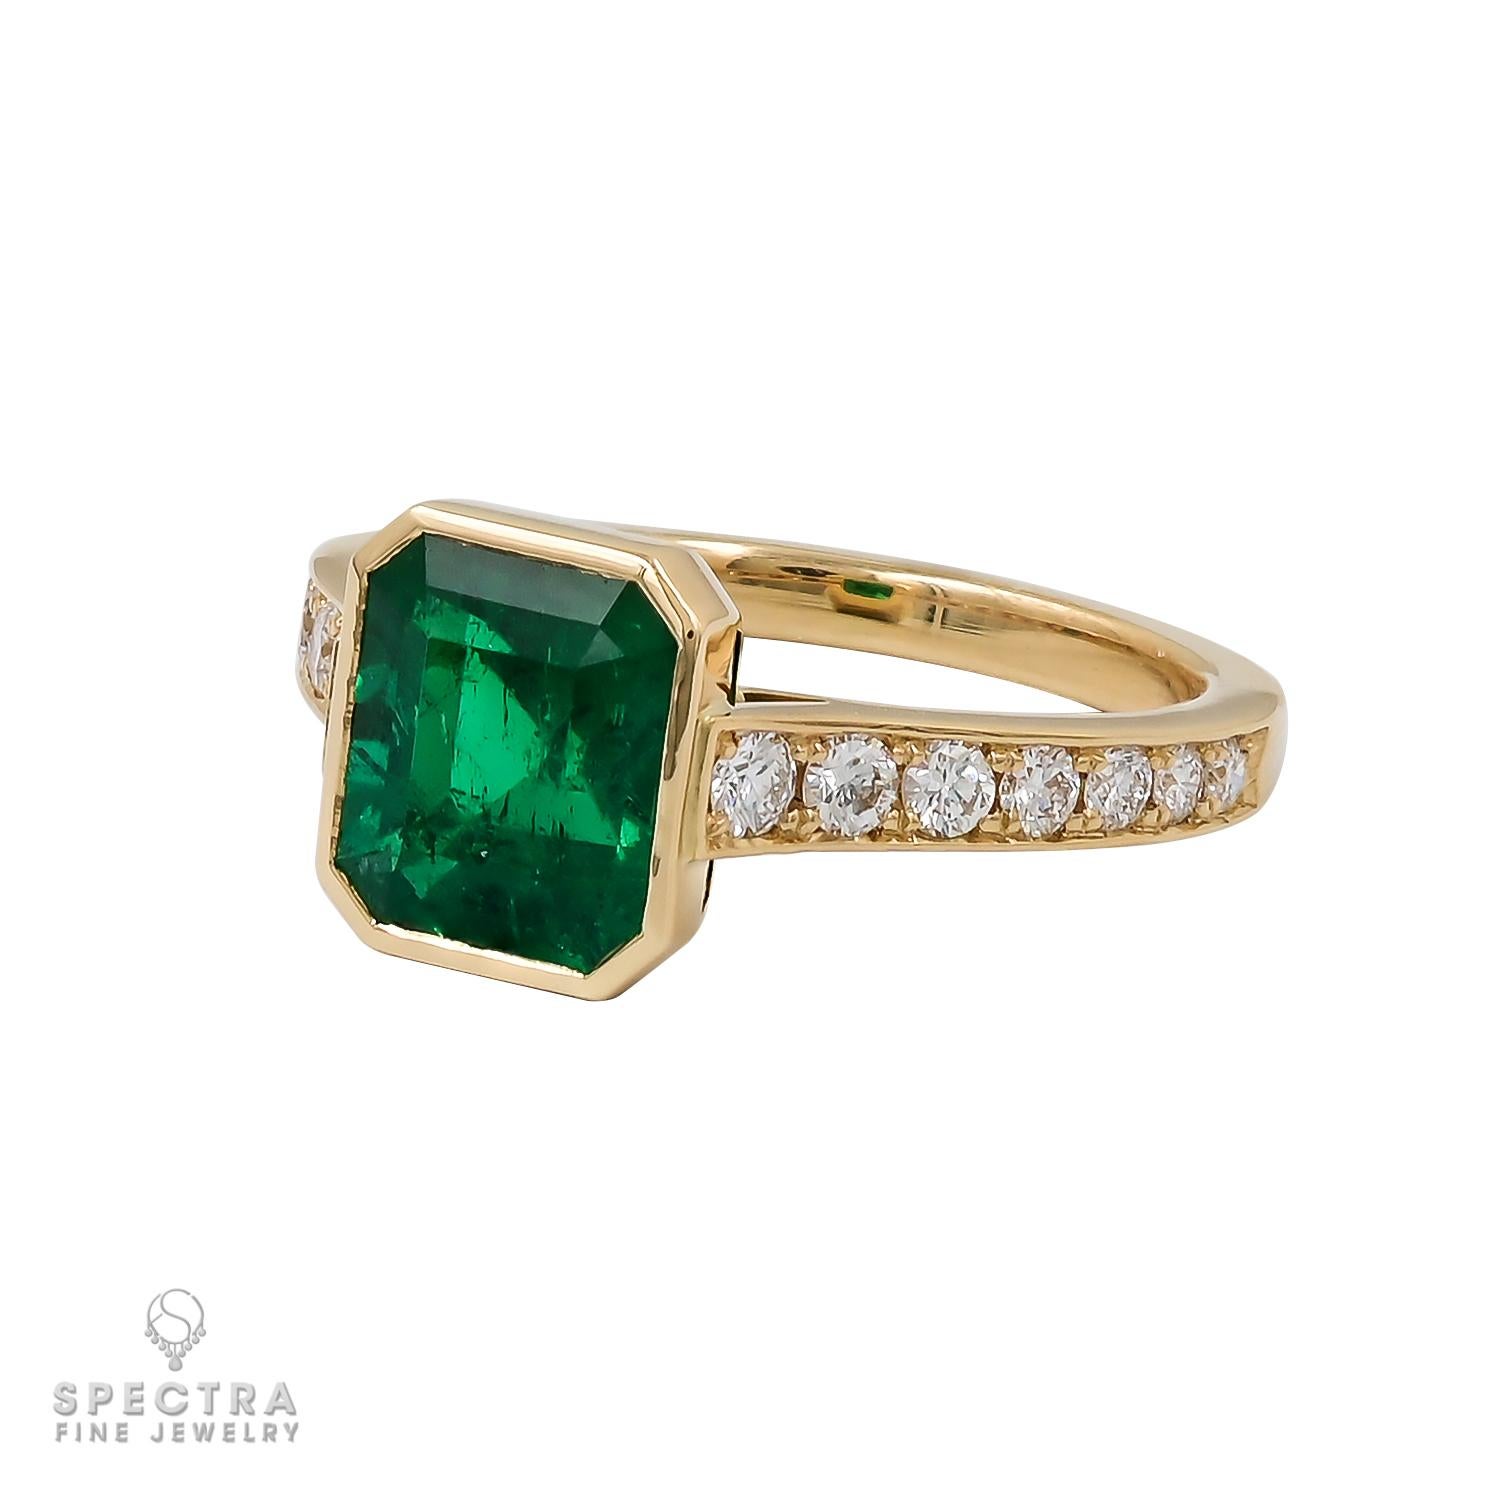 Enhance your jewelry ensemble with the opulence of our Spectra Fine Jewelry 2.03-carat Colombian Emerald Diamond Ring, a versatile piece designed for both everyday elegance and special occasions. This extraordinary piece showcases a GRS certified